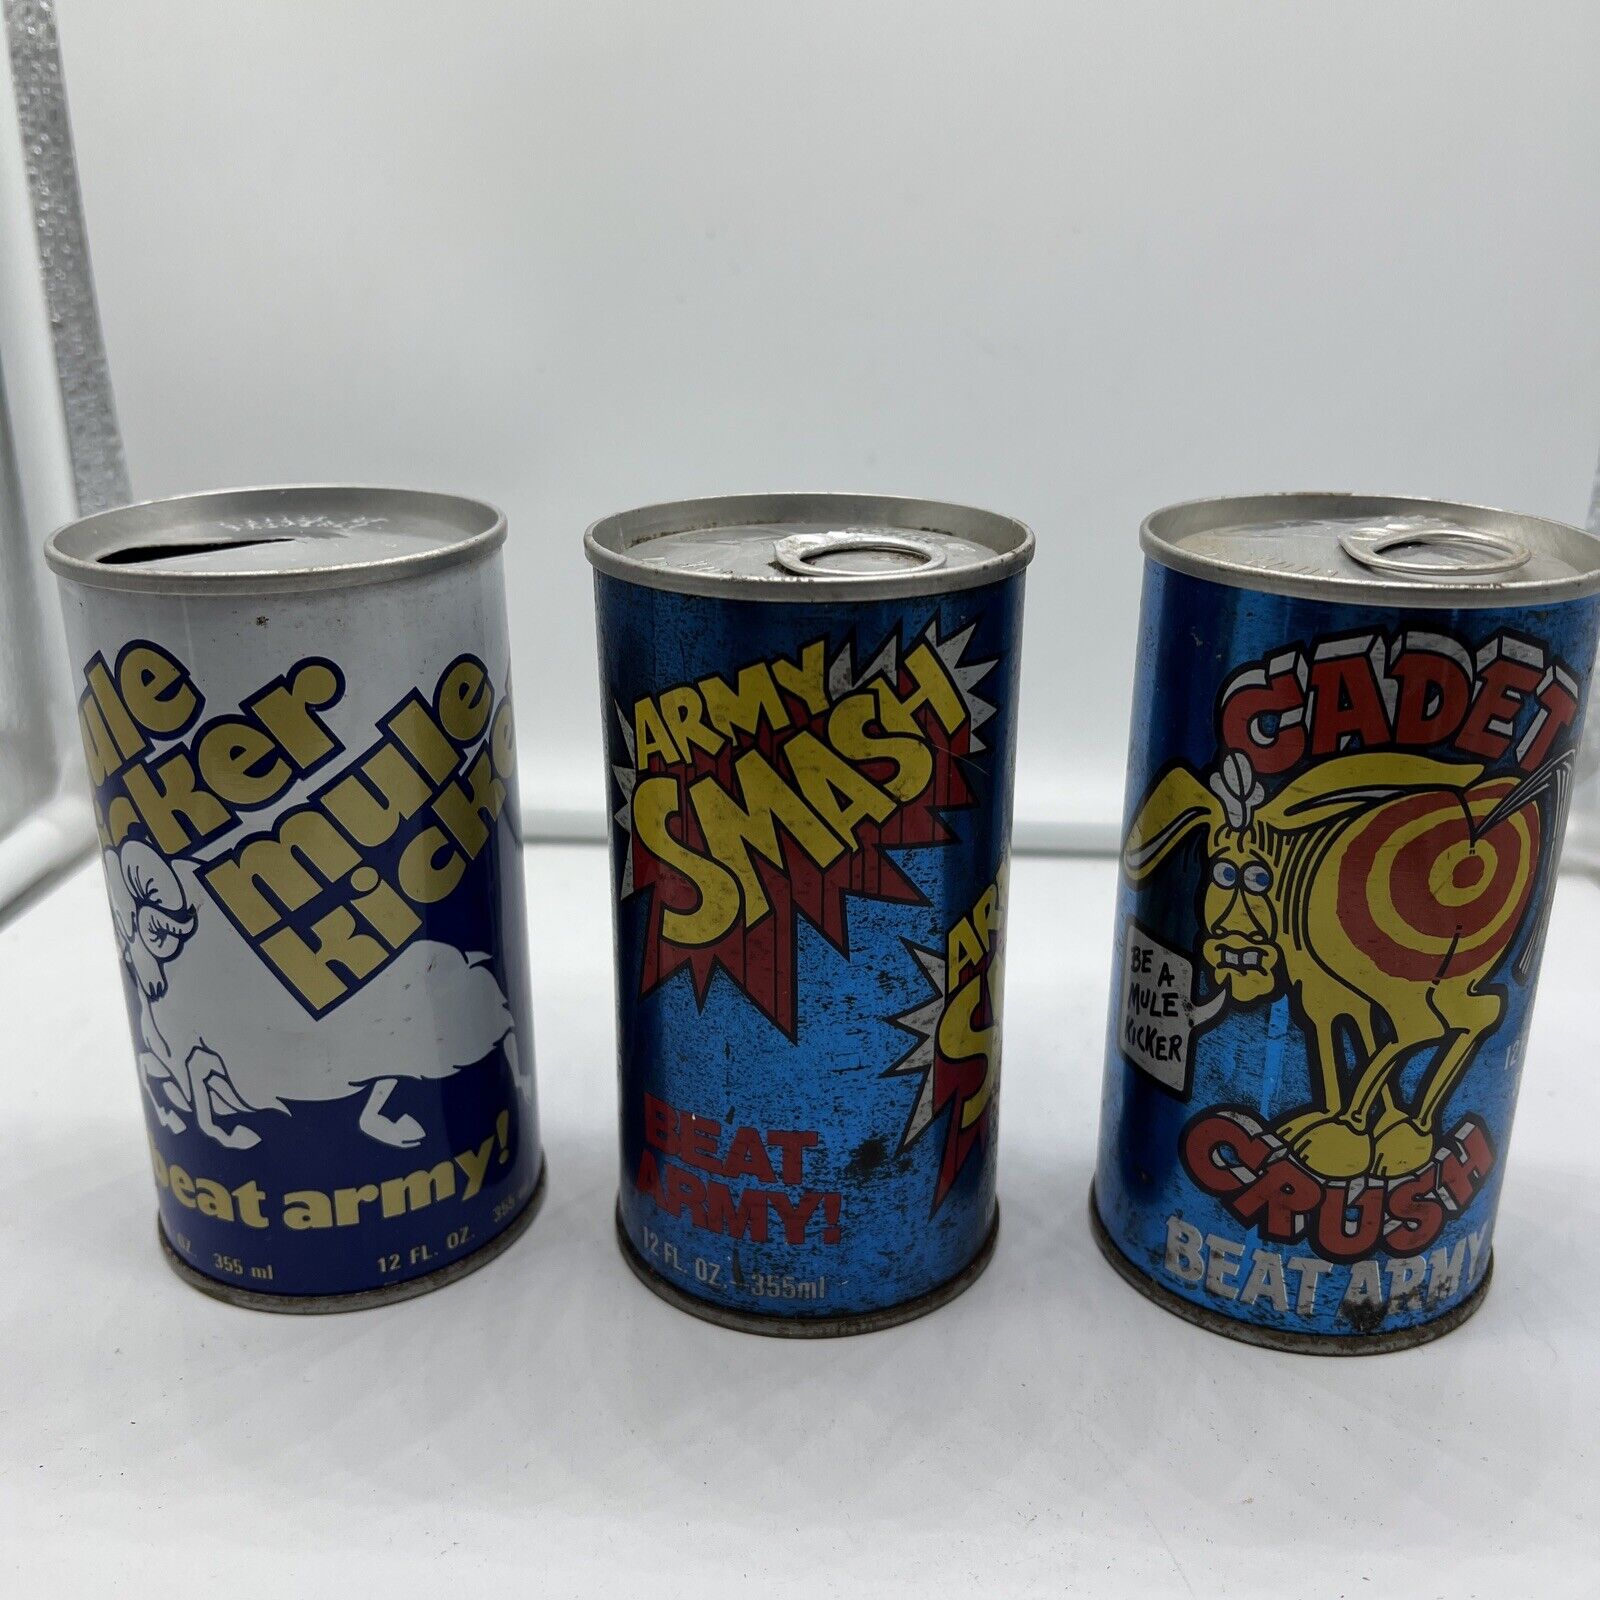 Lot of 3 soda cans from 1977-1979 Navy vs Army Game